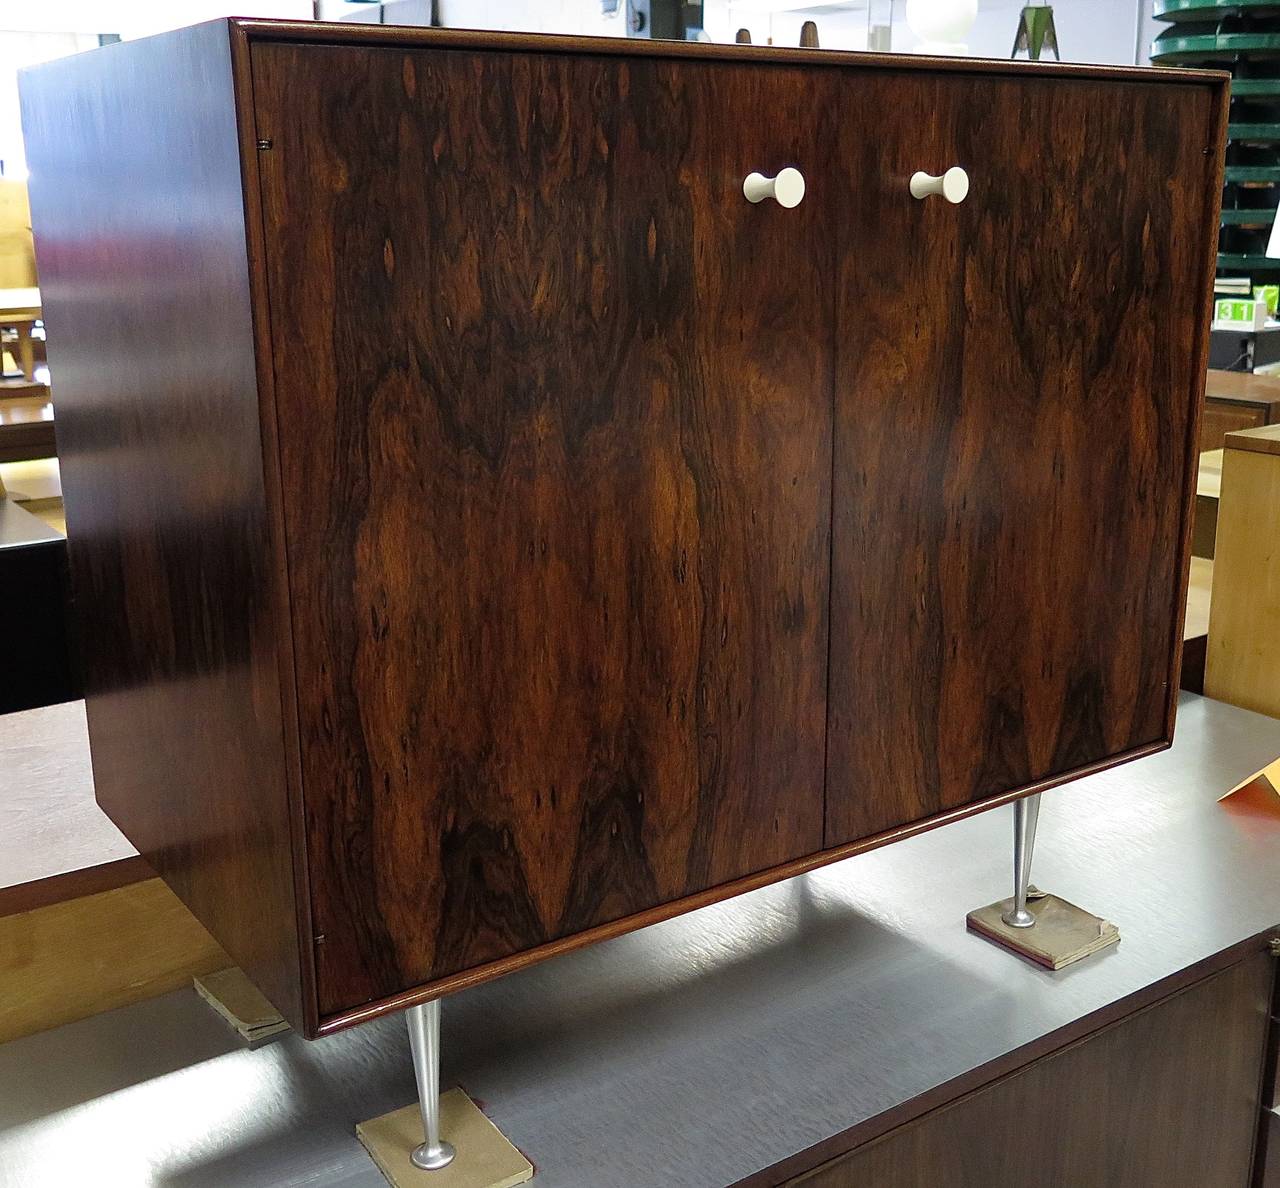 Beautiful two-door cabinet in rosewood with very active grain. Two Bakelite pulls. Aluminum legs. Inside there is one adjustable shelf. The piece has been totally restored. The original label is inside cabinet.